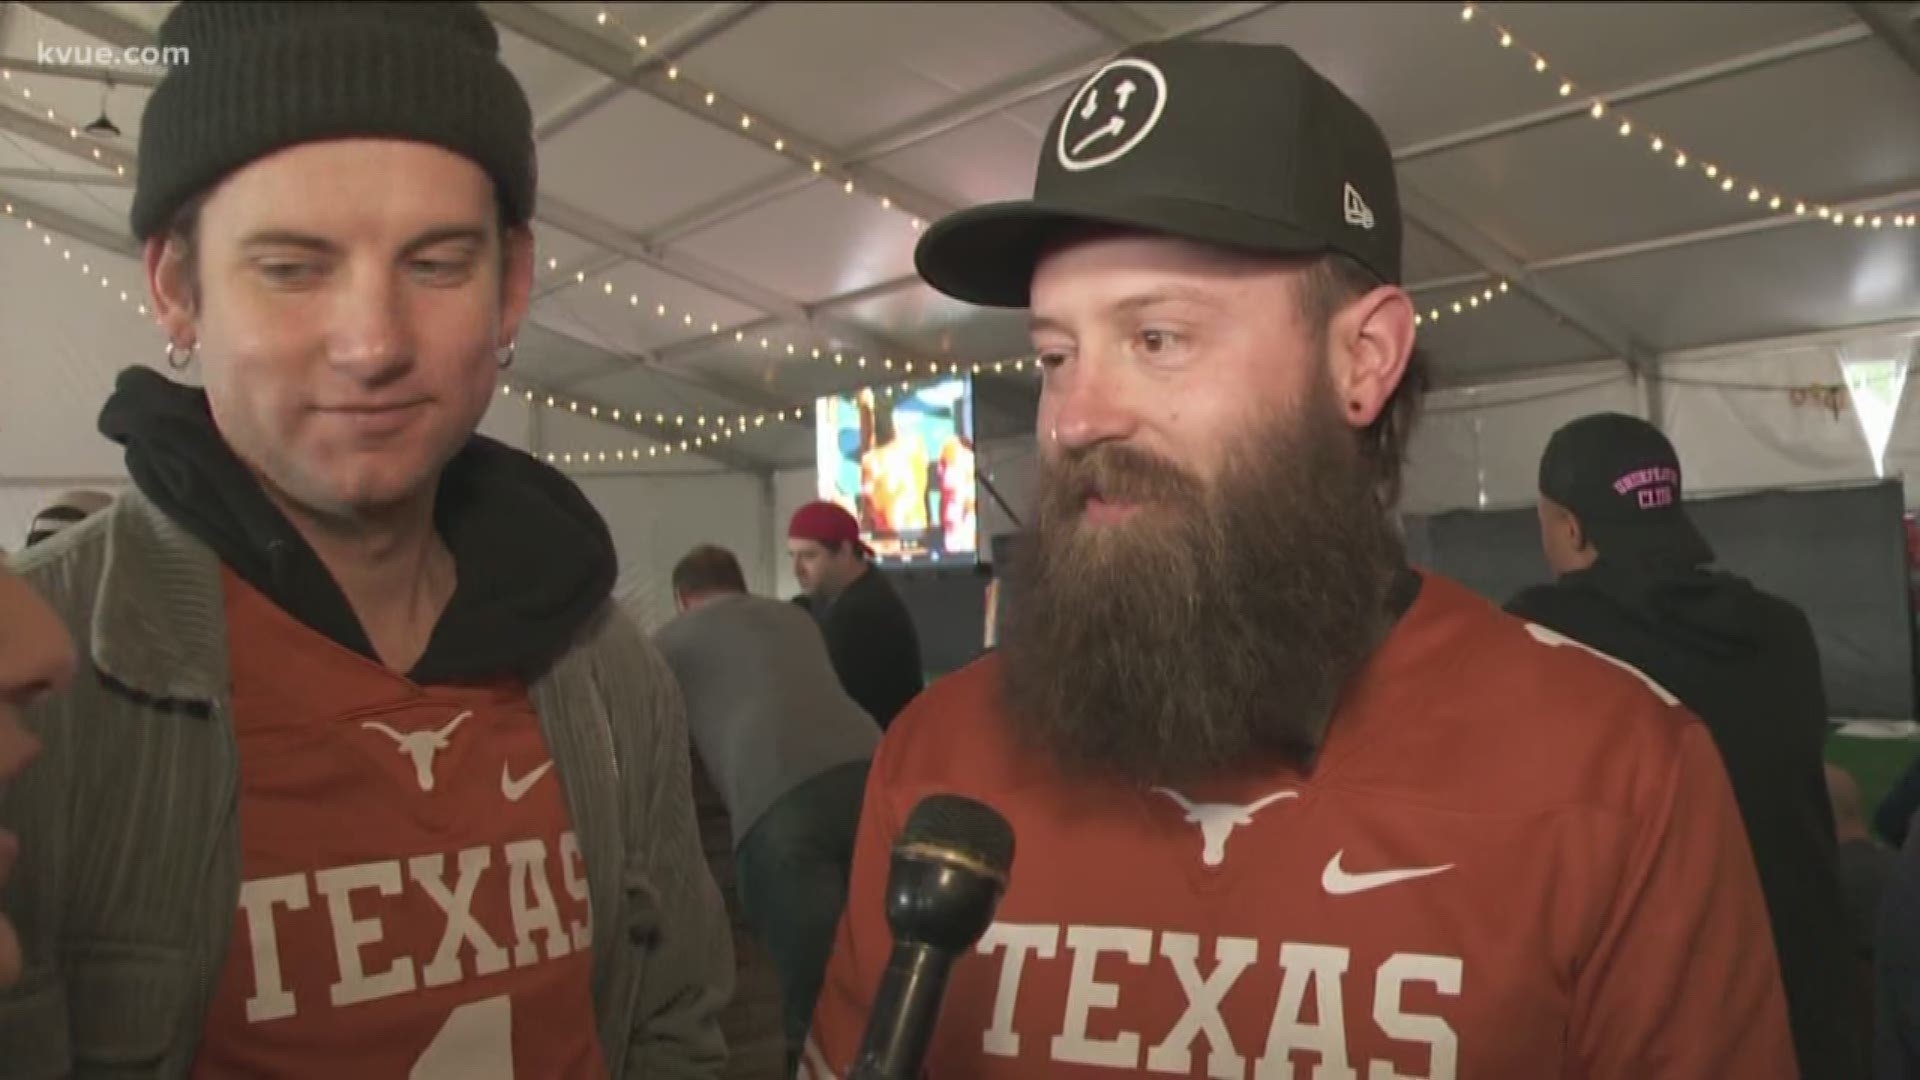 Being at the Austin City Limits Music Festival didn't stop these Texas Longhorns fans from watching the big game.